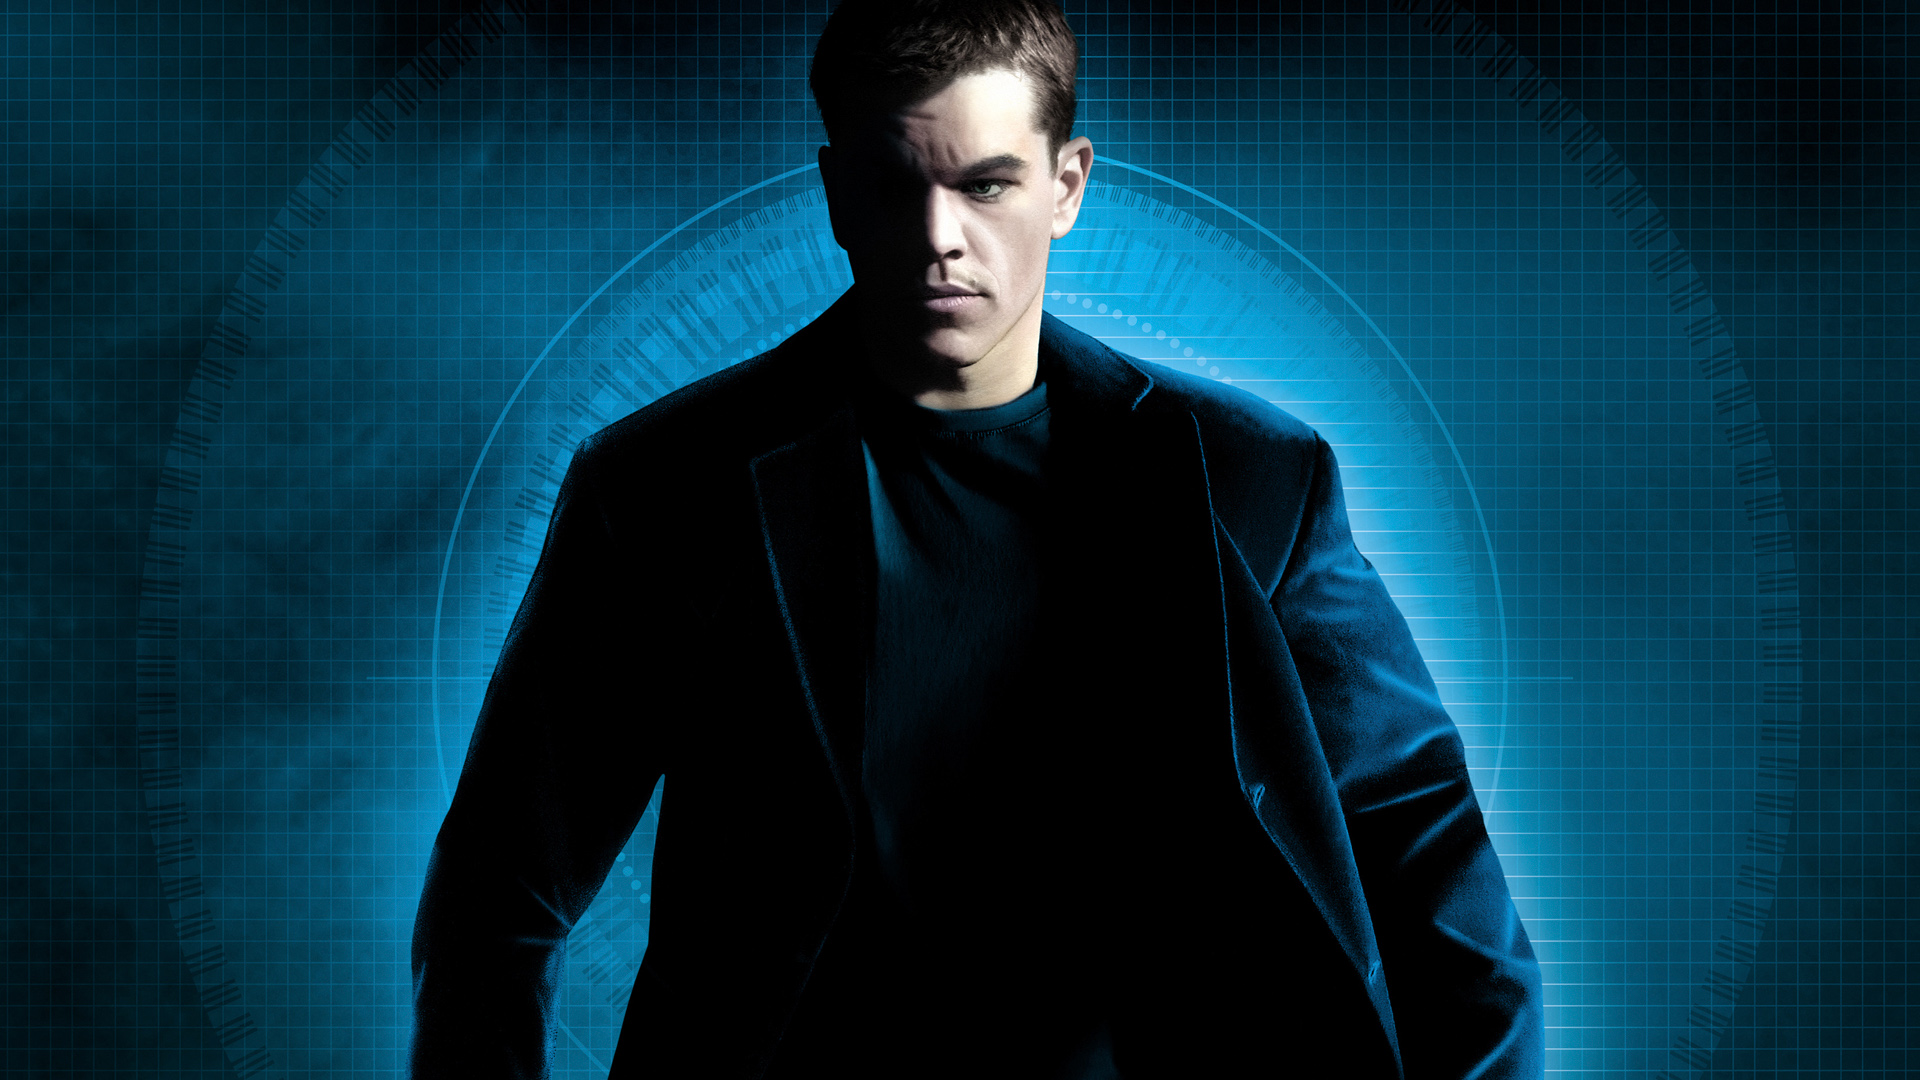 Movie The Bourne Supremacy HD Wallpaper | Background Image